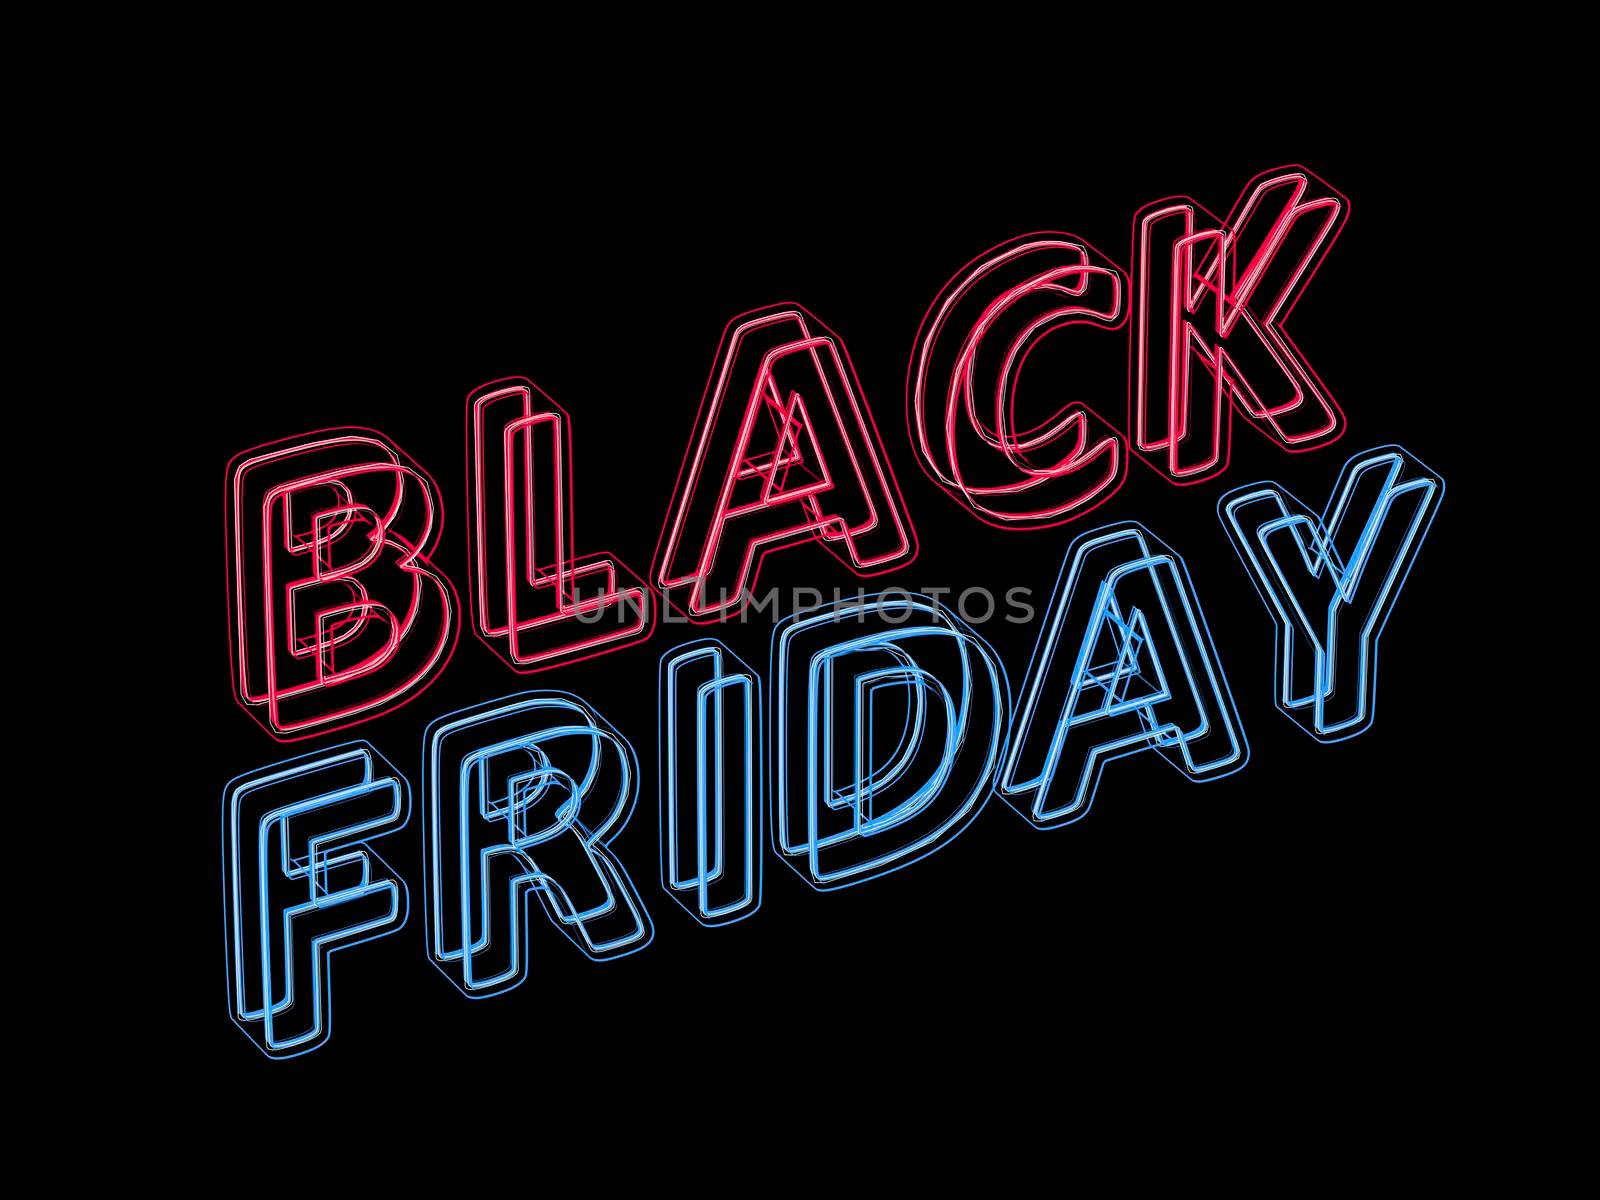 Black friday sale banner by magraphics